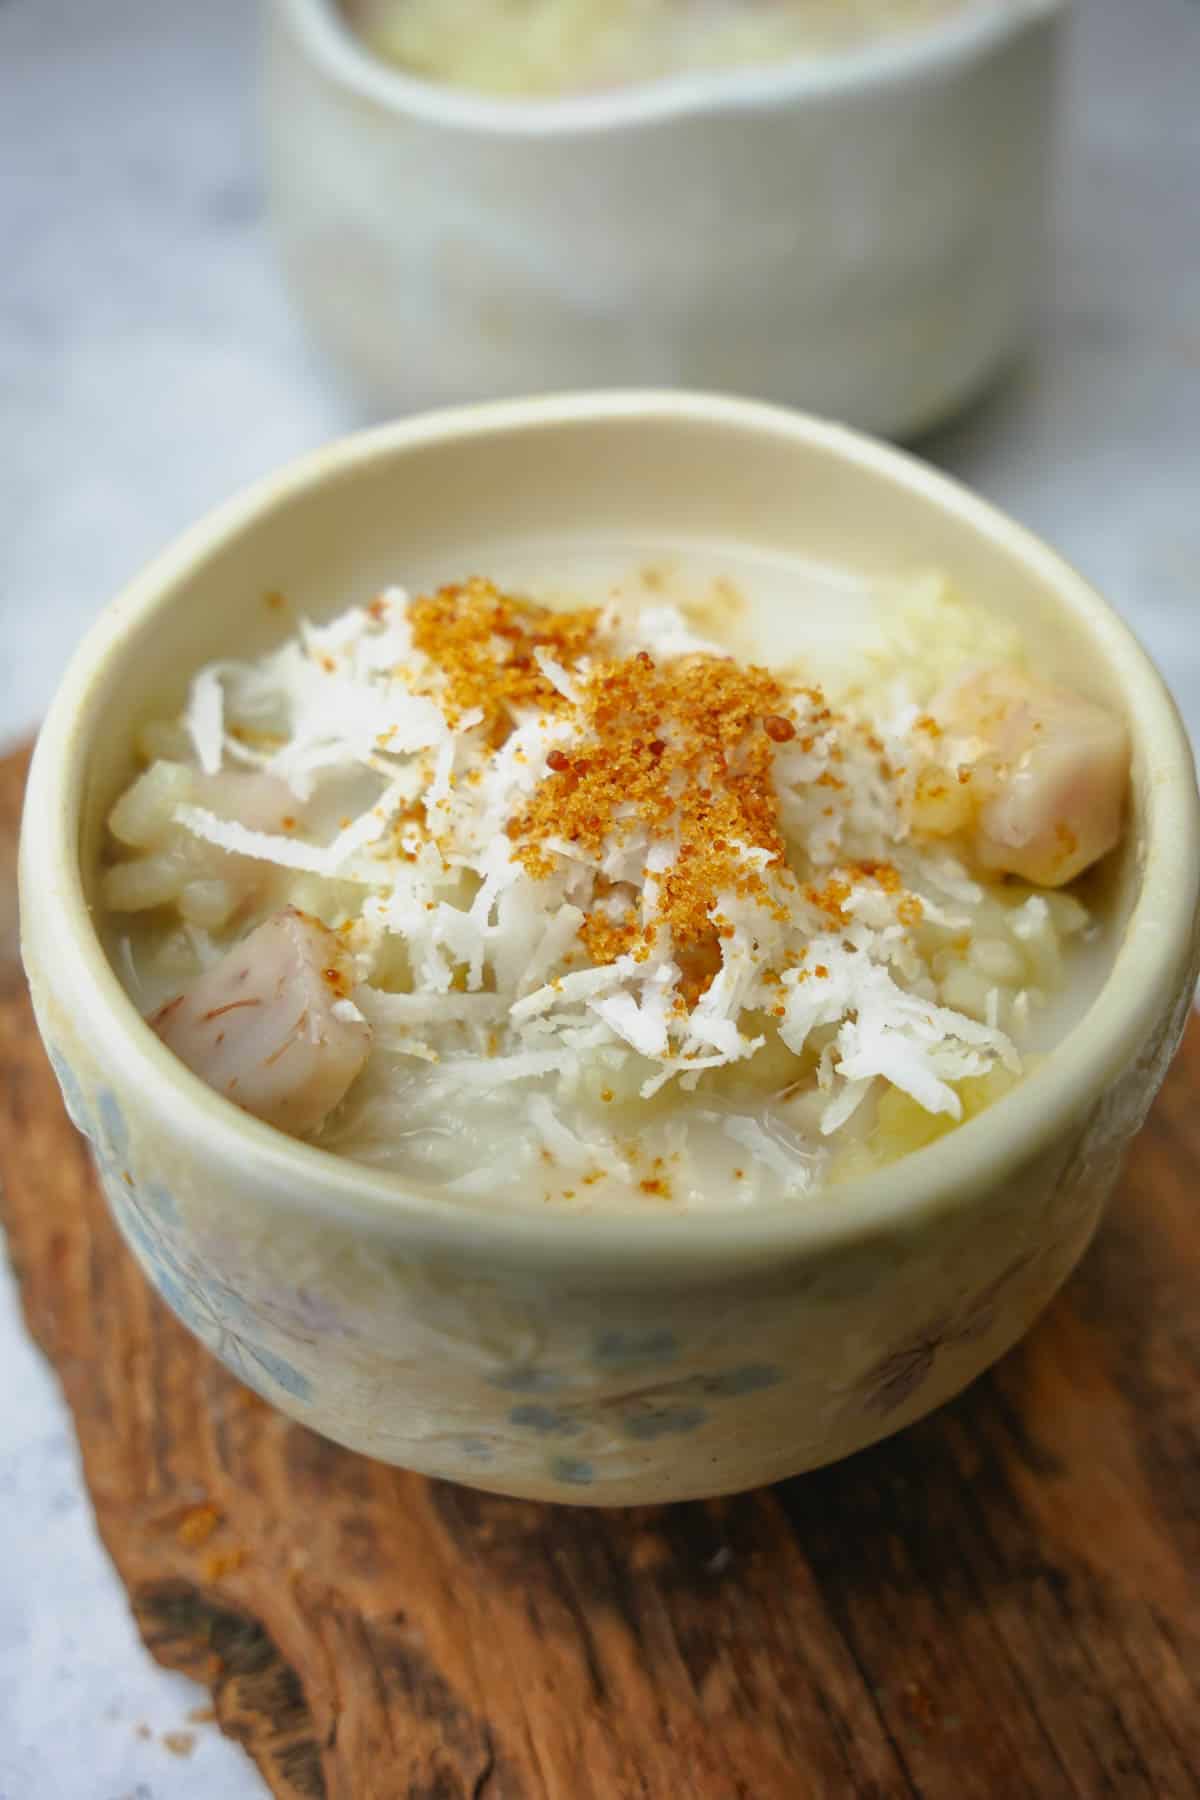 A bowl of che khoai mon topped with coconut and palm sugar.